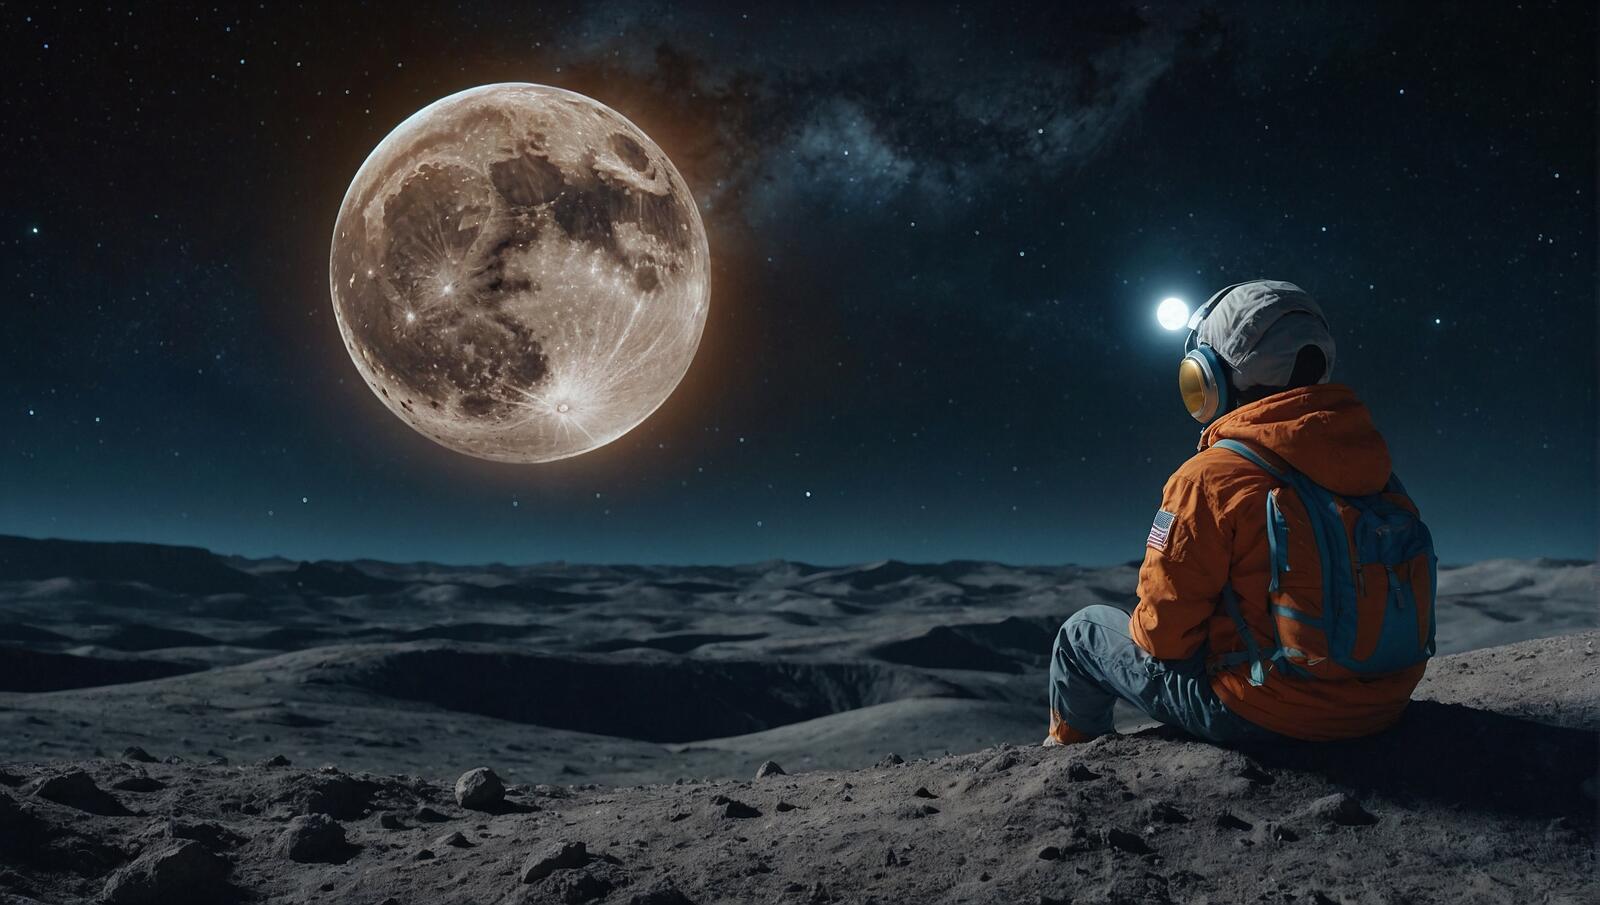 Free photo A man in an orange jacket sits on the ground next to a full moon